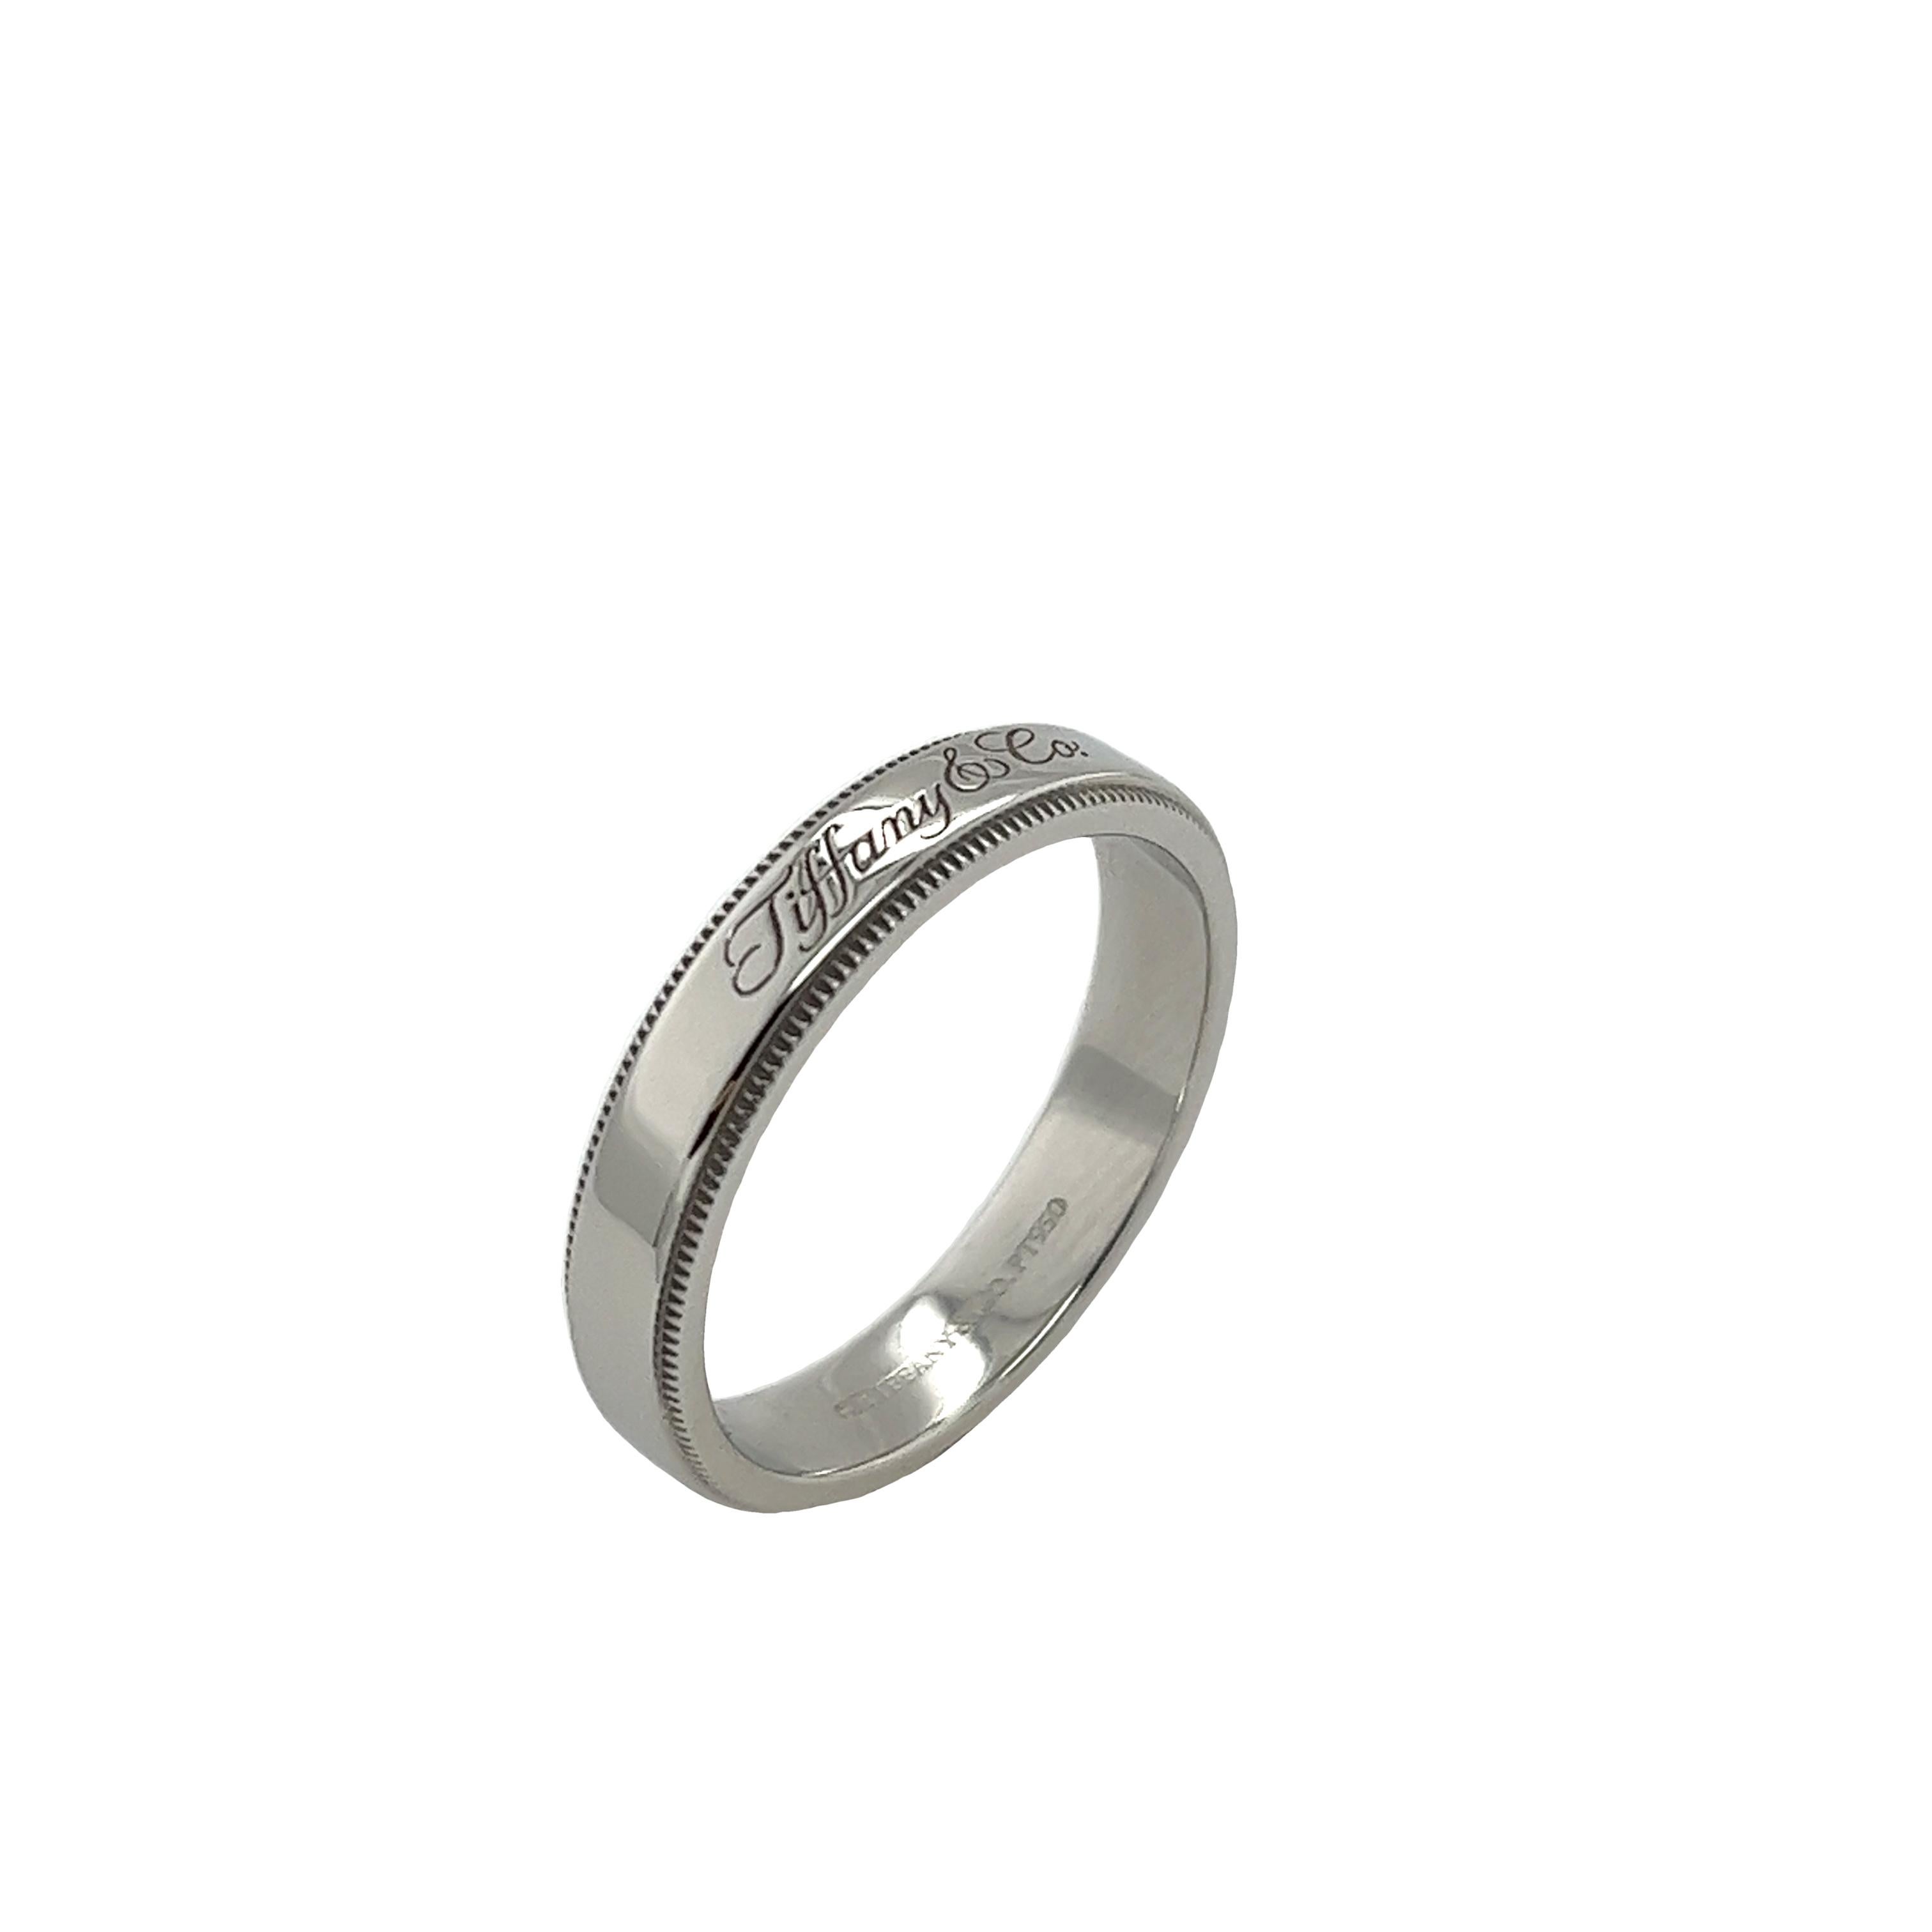 Tiffany & Co 4mm Together Platinum Milgrain Edge Wedding Ring In Excellent Condition For Sale In London, GB